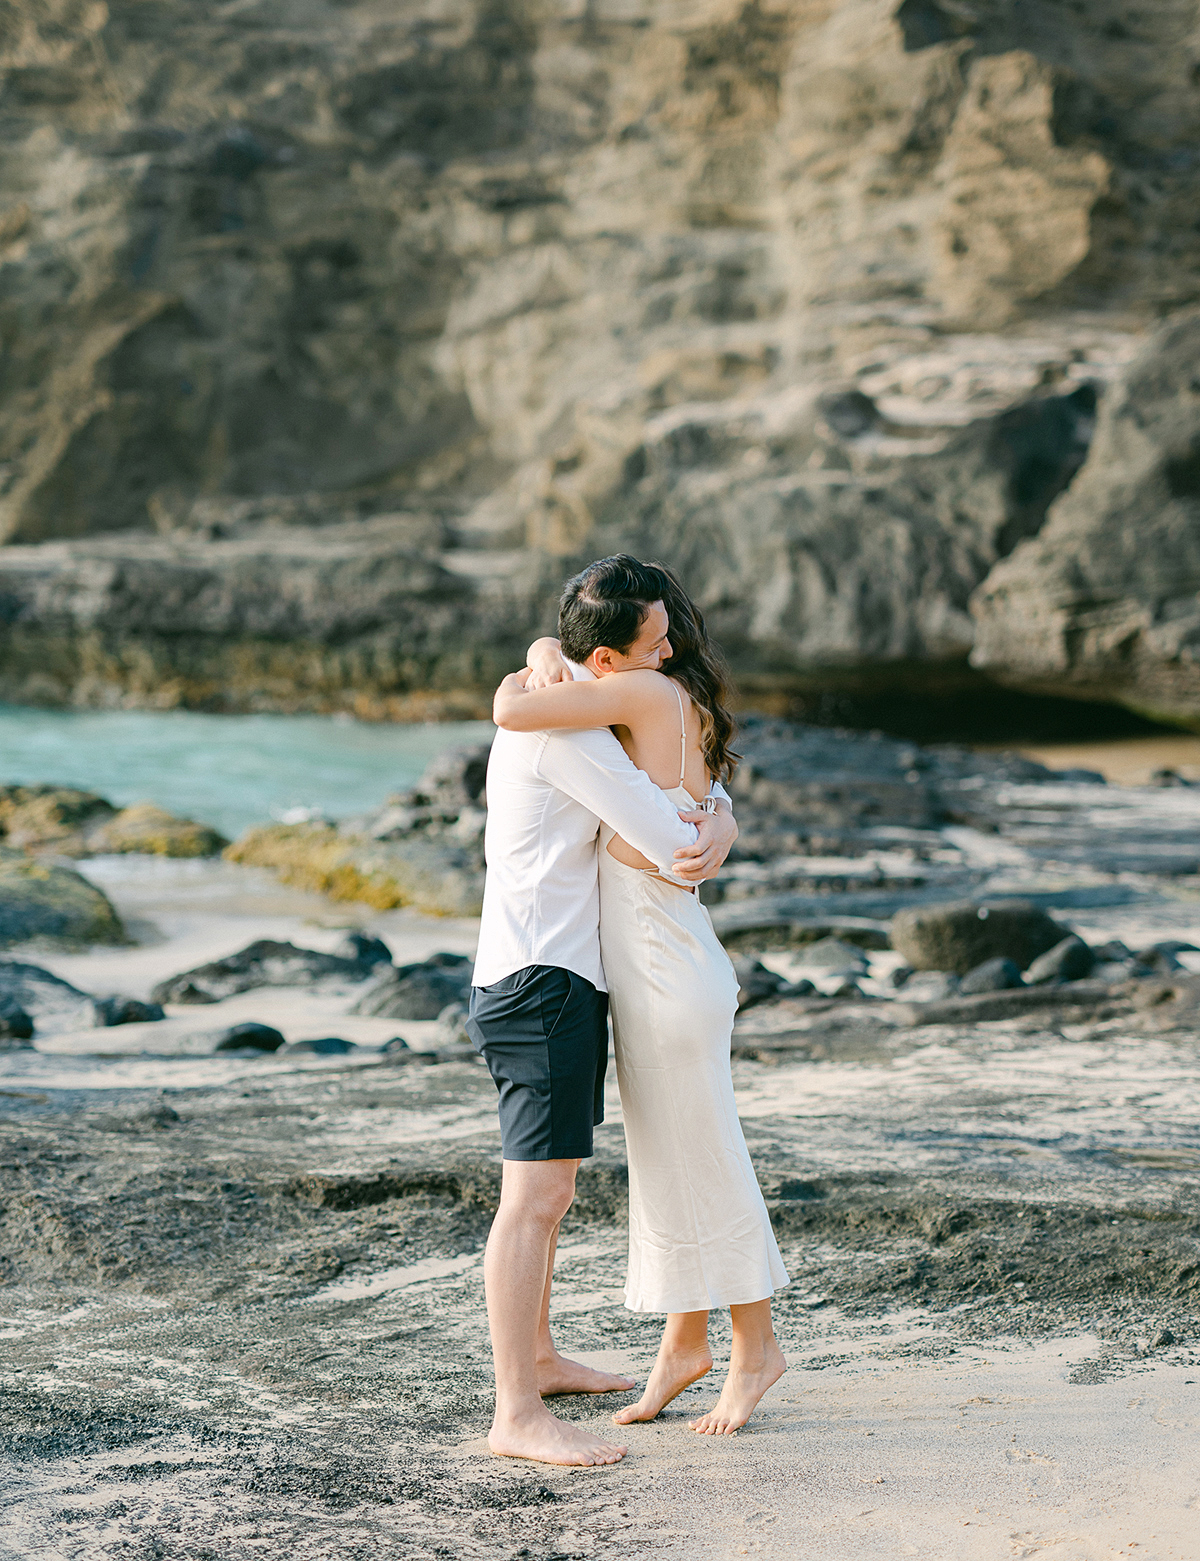 Hawaii proposal photographer | How to propose in Hawaii by Laura Ivanova Photography